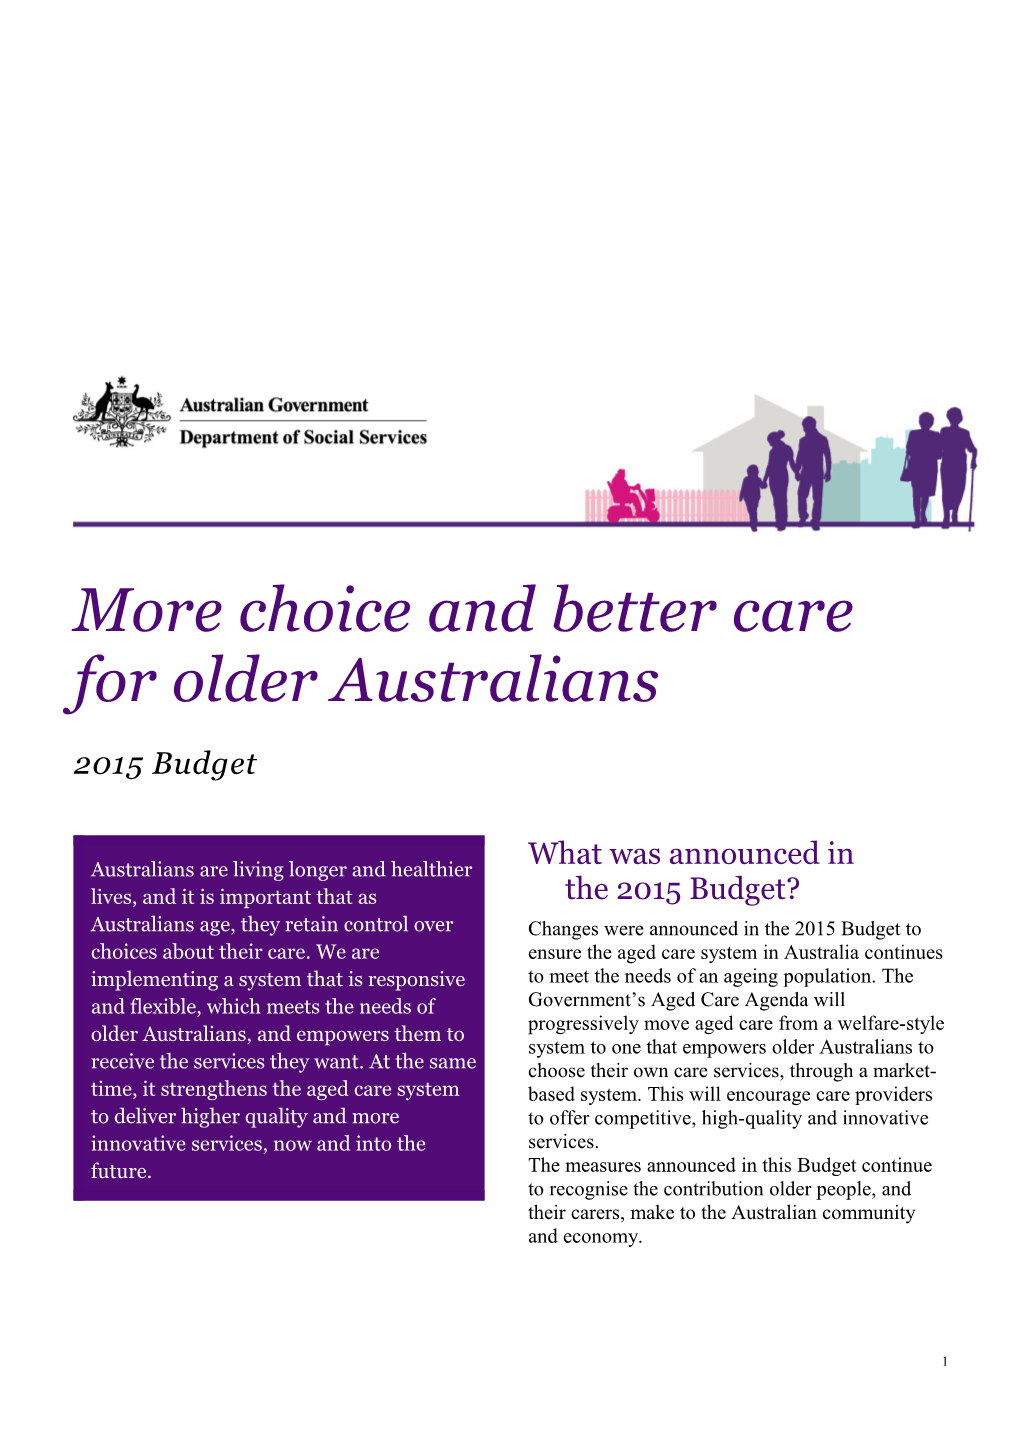 More Choice and Better Care